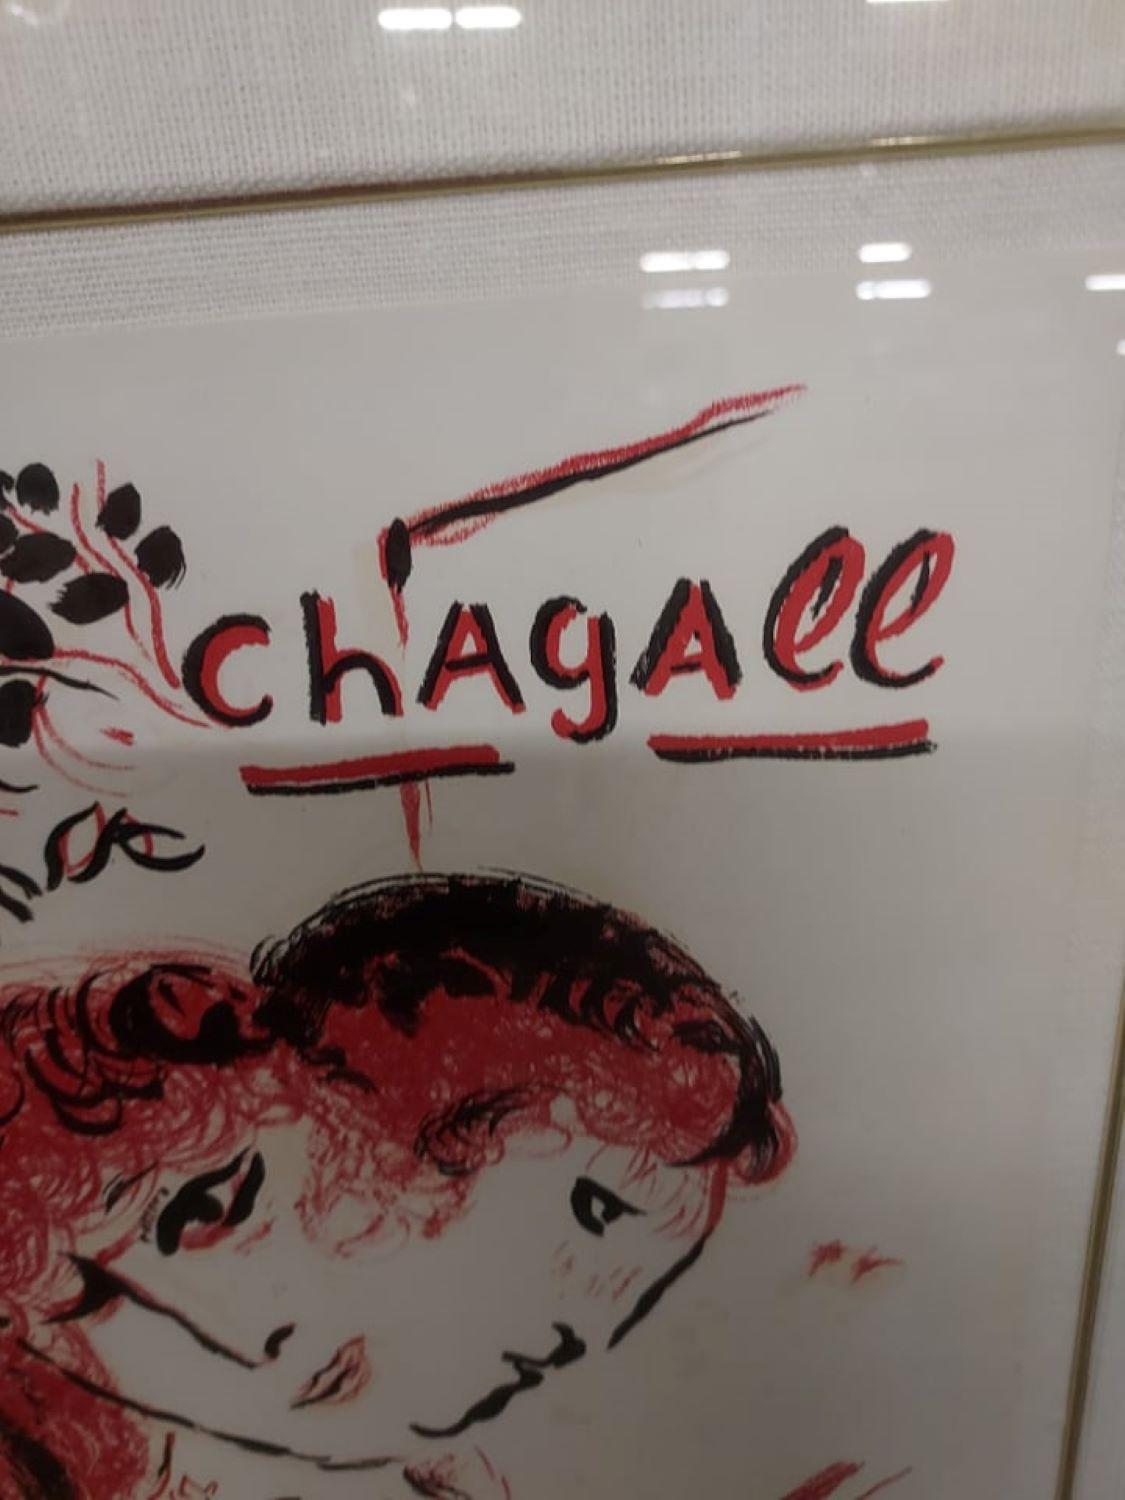 Wonderful framed lithograph print titled 'Lithographe III' produced by the very well known listed Modern/ Expressionist artist, Marc Chagall. This particular print was created as the cover art for the book 'Chagall Lithographe Tome III' published by